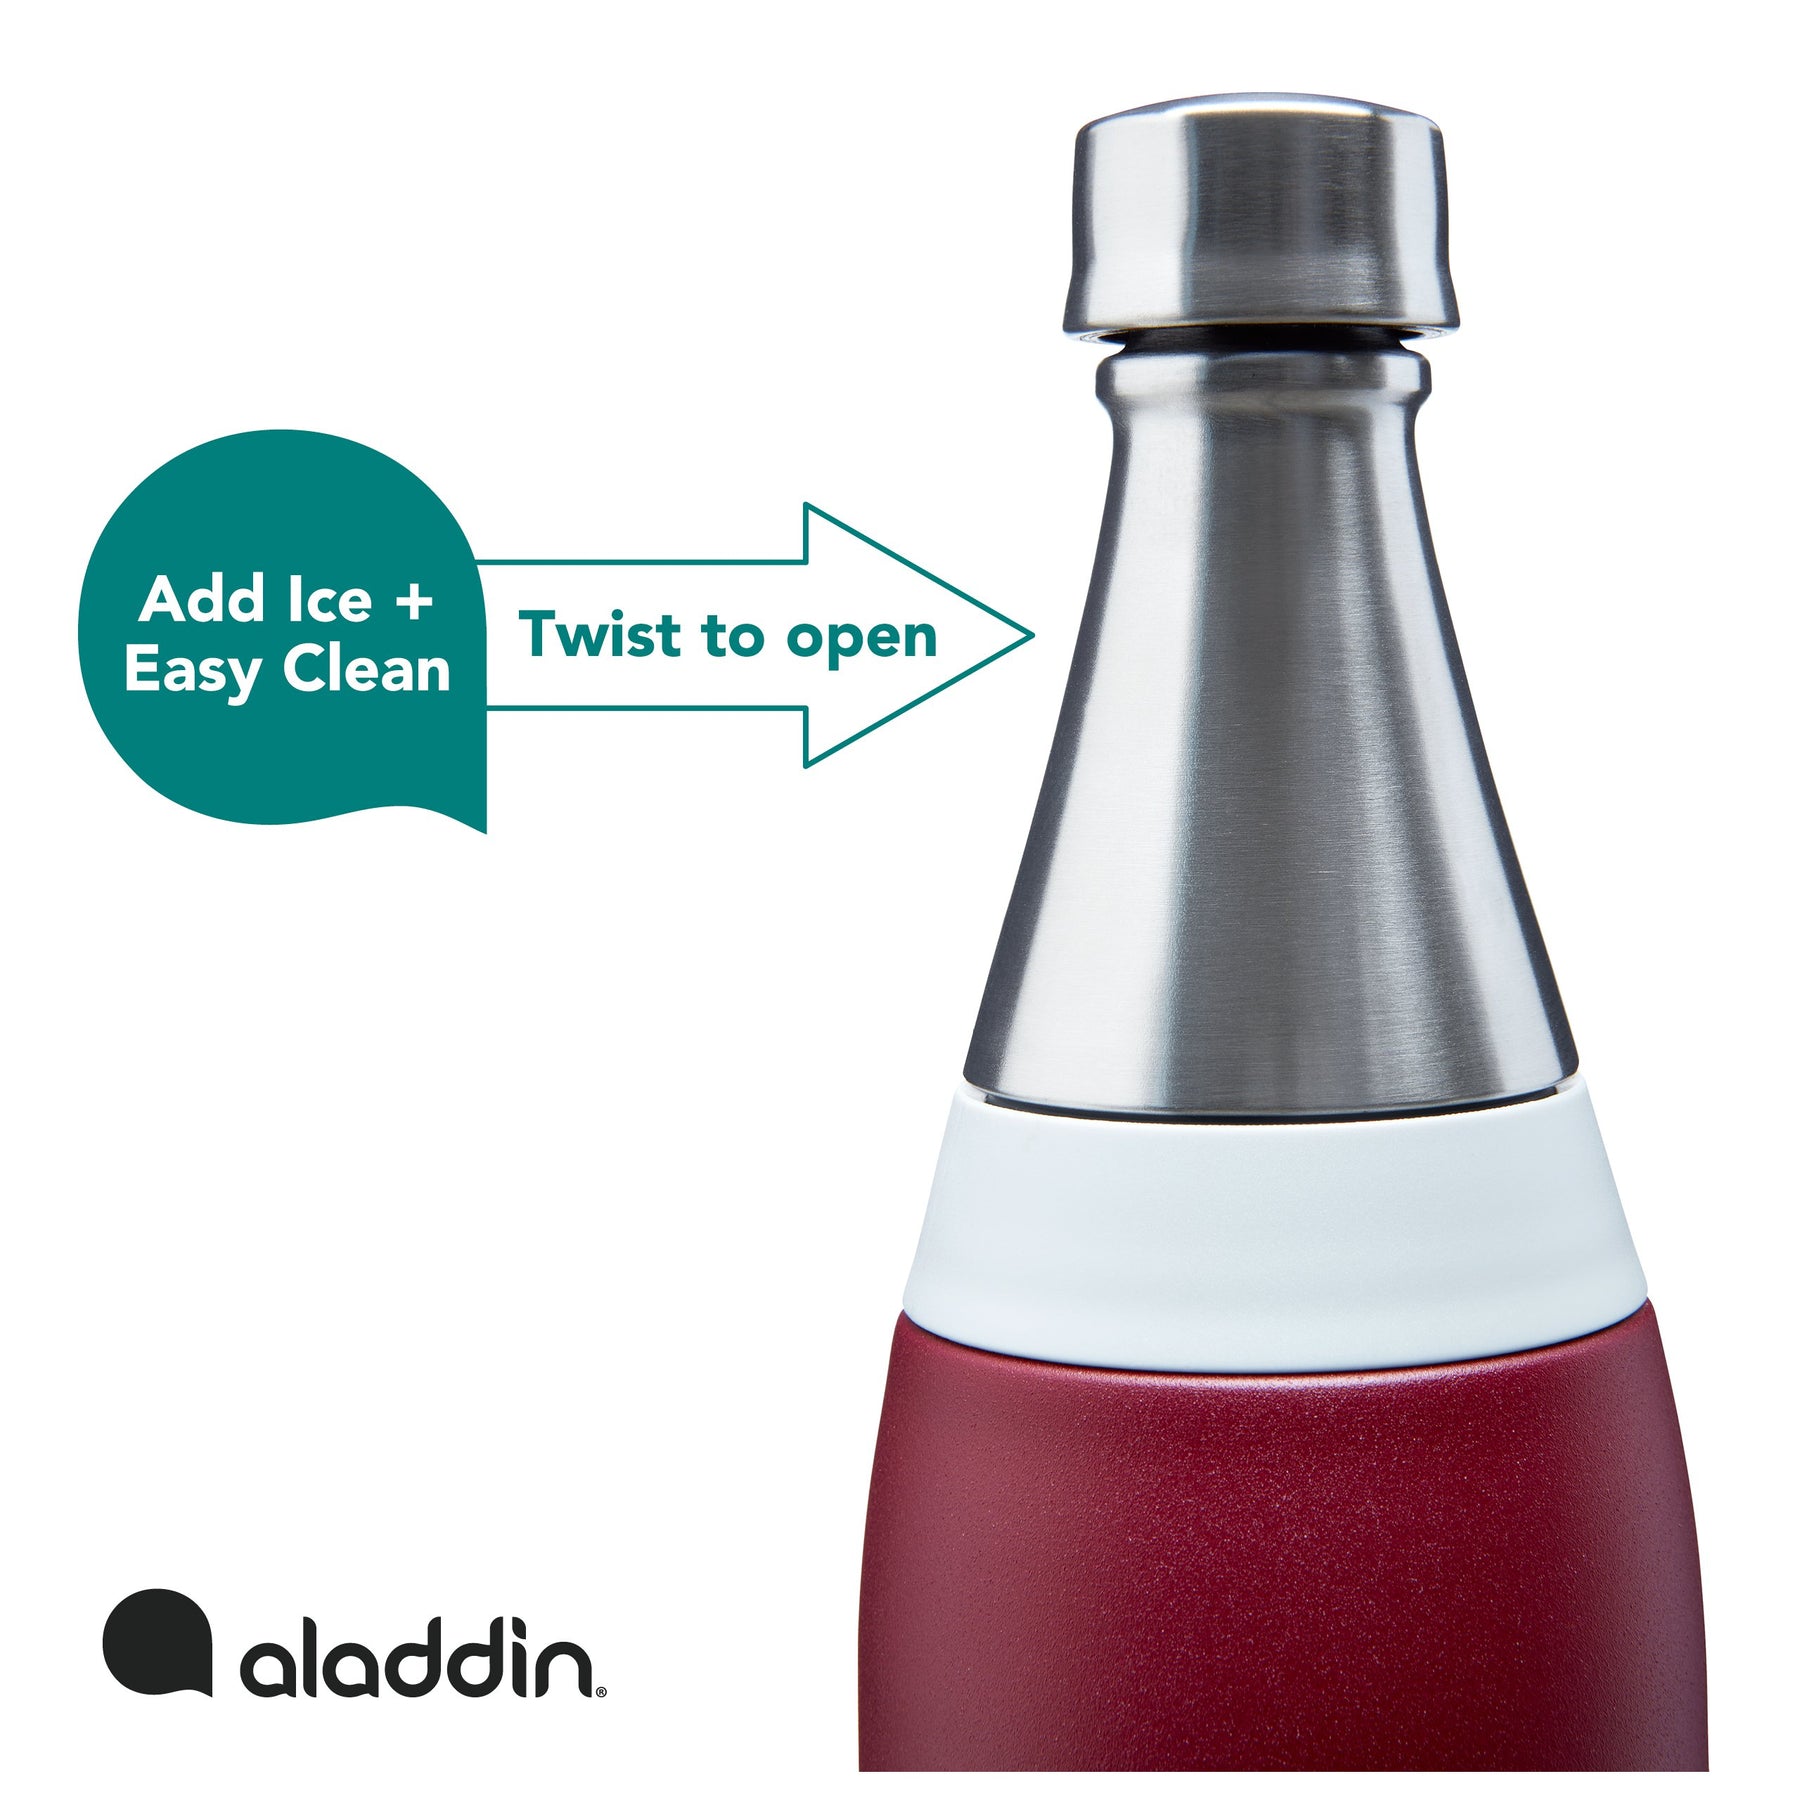 Aladdin-Fresco-Thermavac_-Stainless-Steel-Water-Bottle-0.6L-Burgundy-Red-10-10098-005-Lid-Front_1800x1800